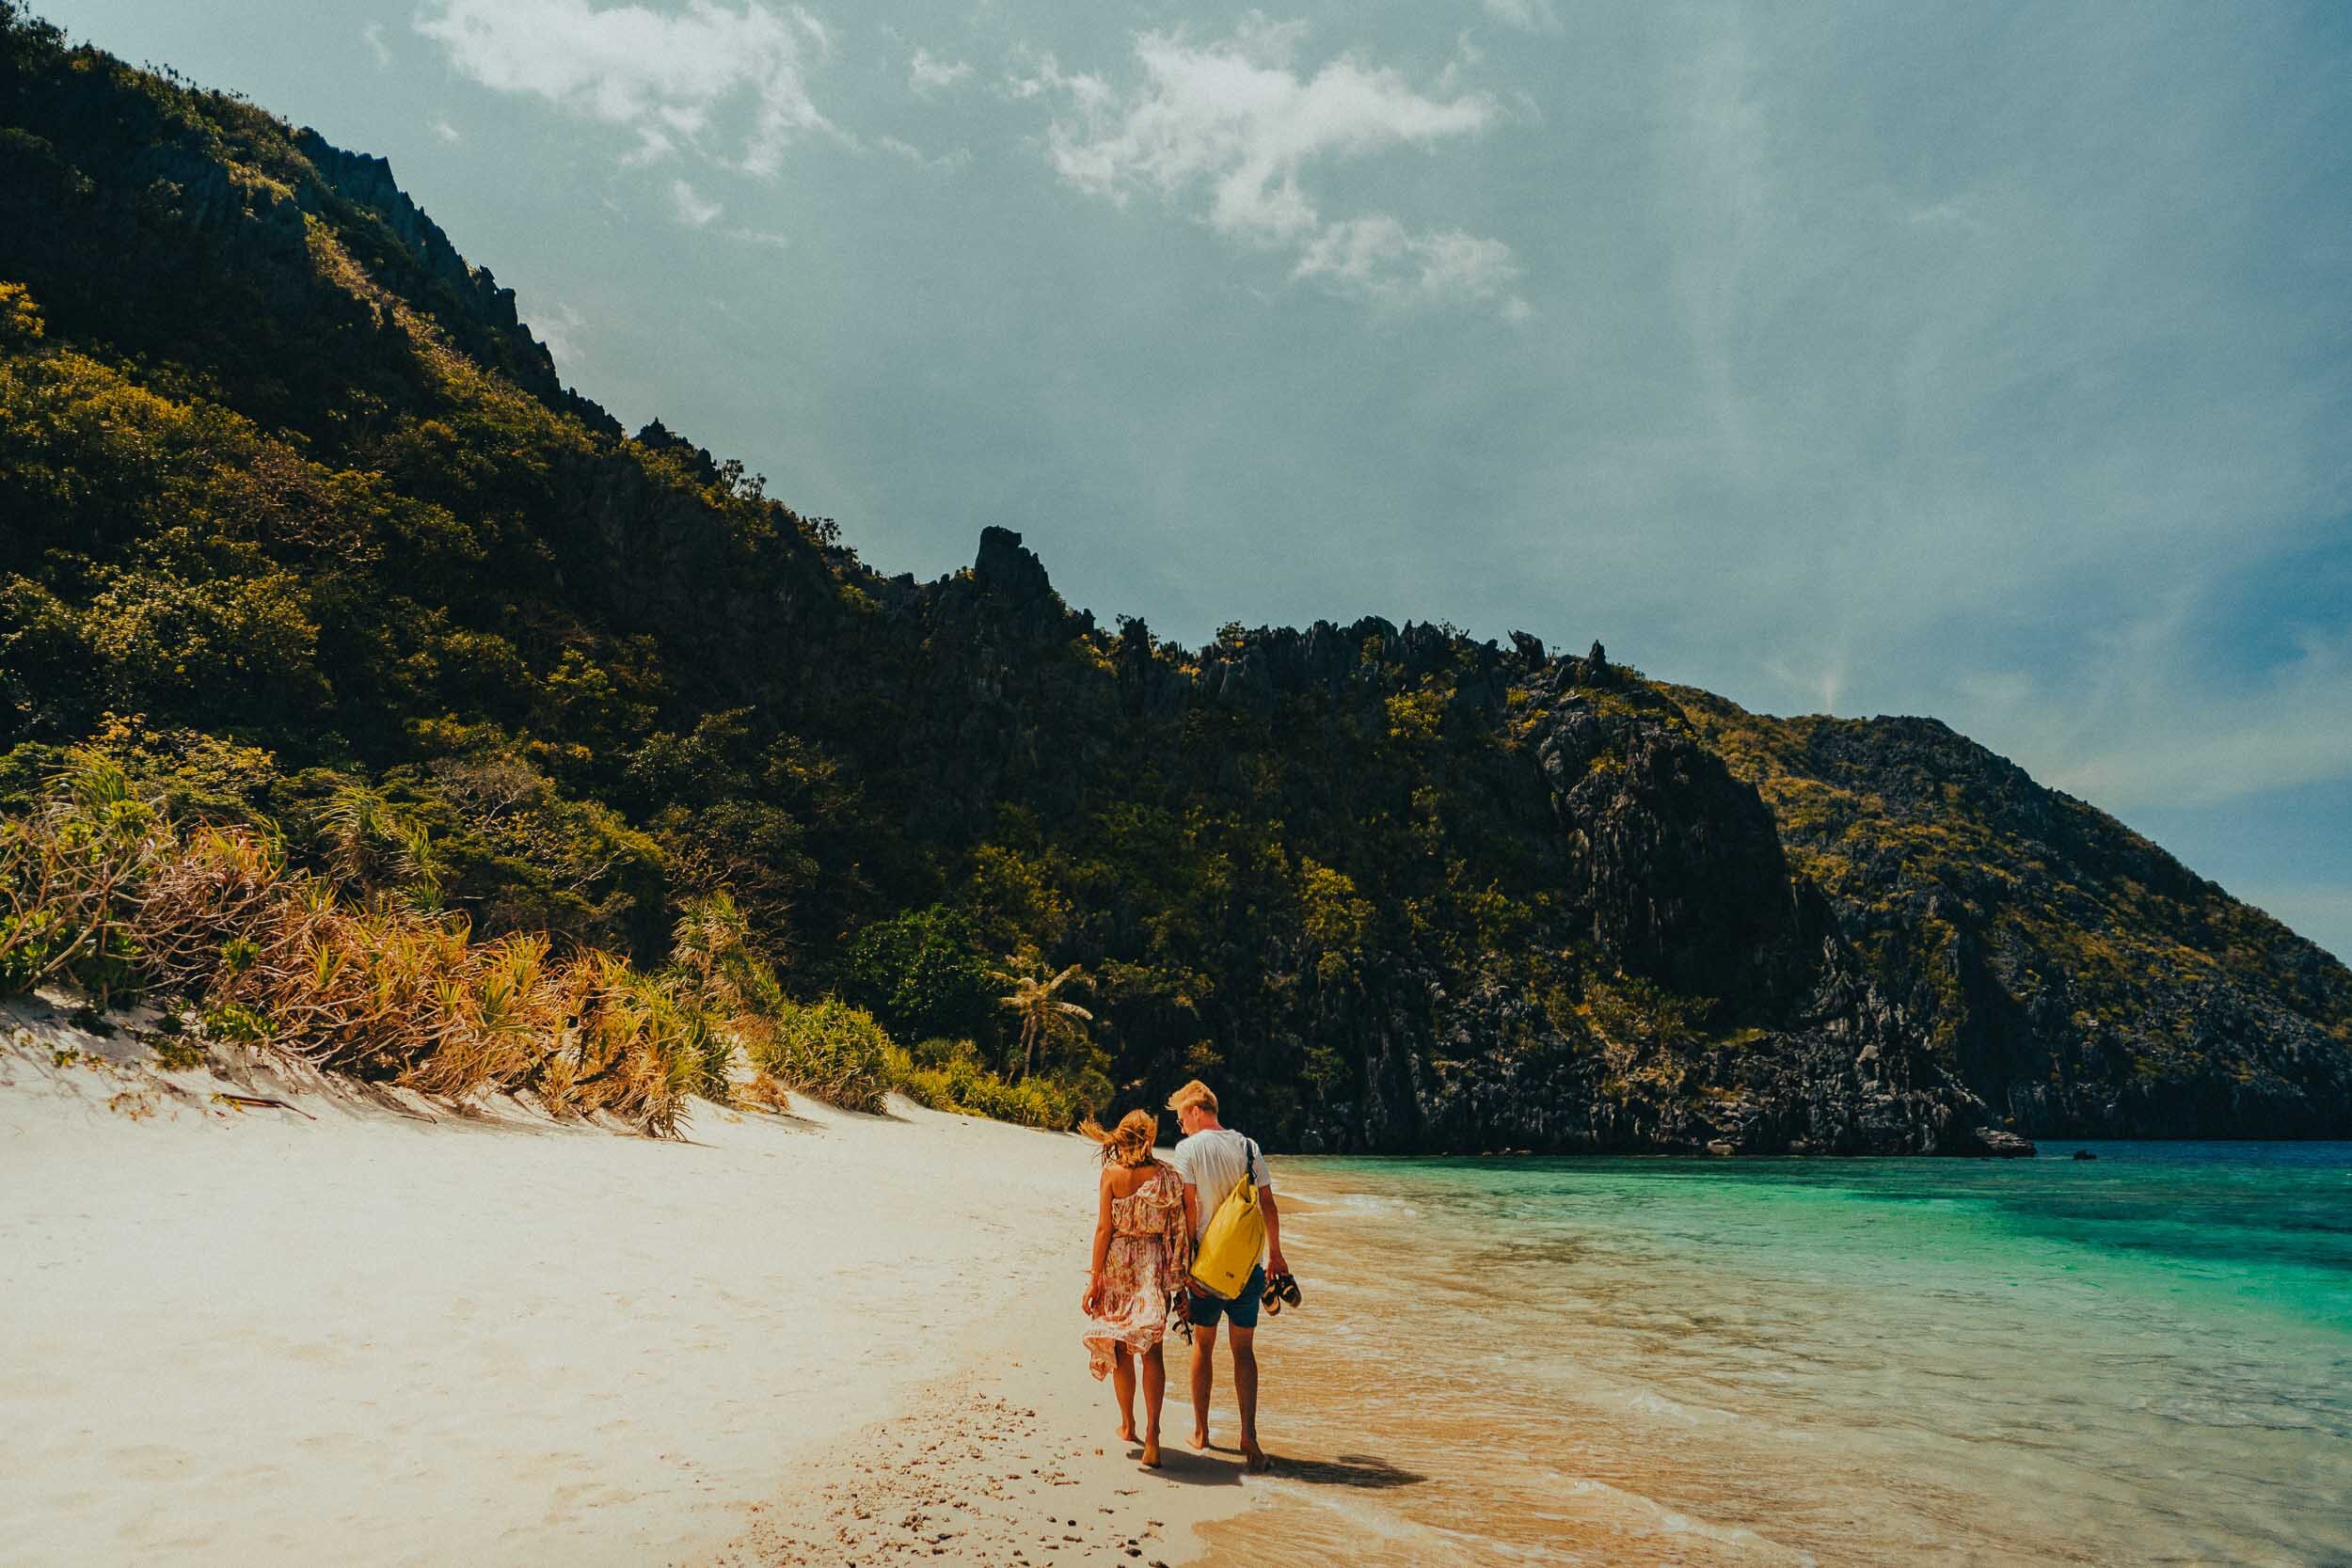 6 El Nido Philippines Couple Photography Honeymoon portraits in Palawan, March 2020. Travel couple photography in Southeast Asia x @hejguj.jpg